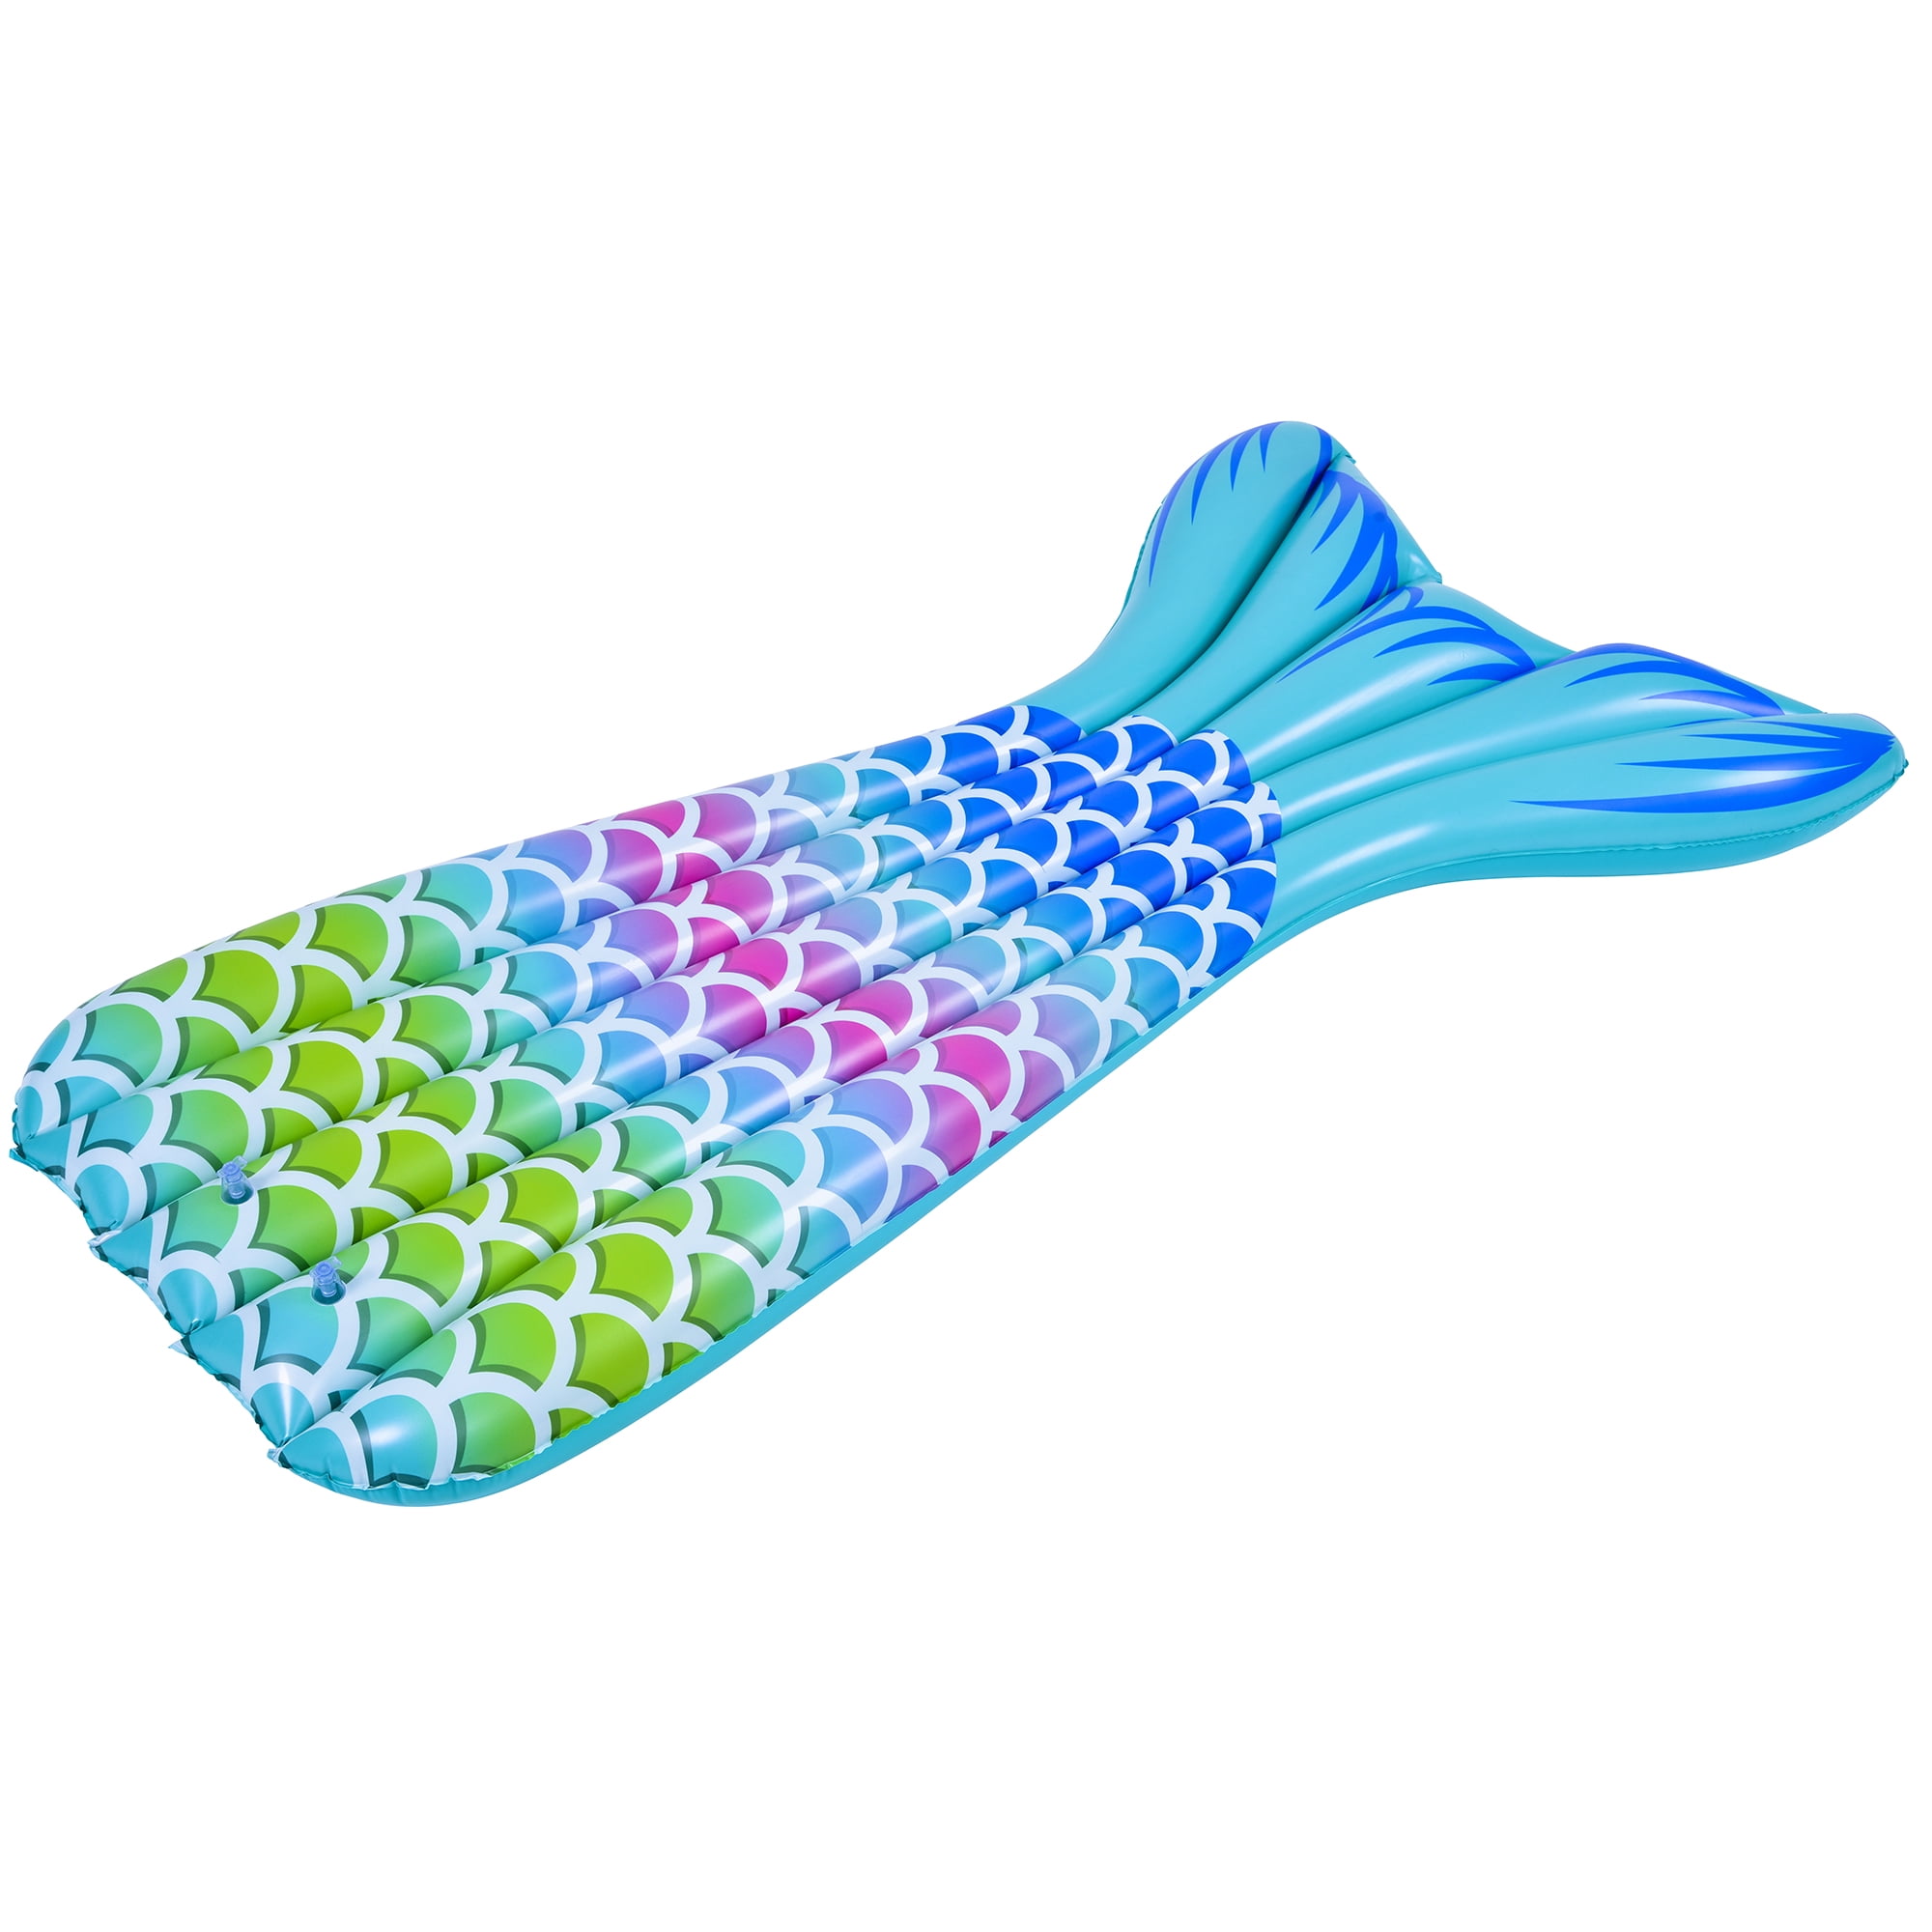 Play Day Inflatable Glitter Mermaid Tail Pool Float 5ft 10 Inches Long for sale online 